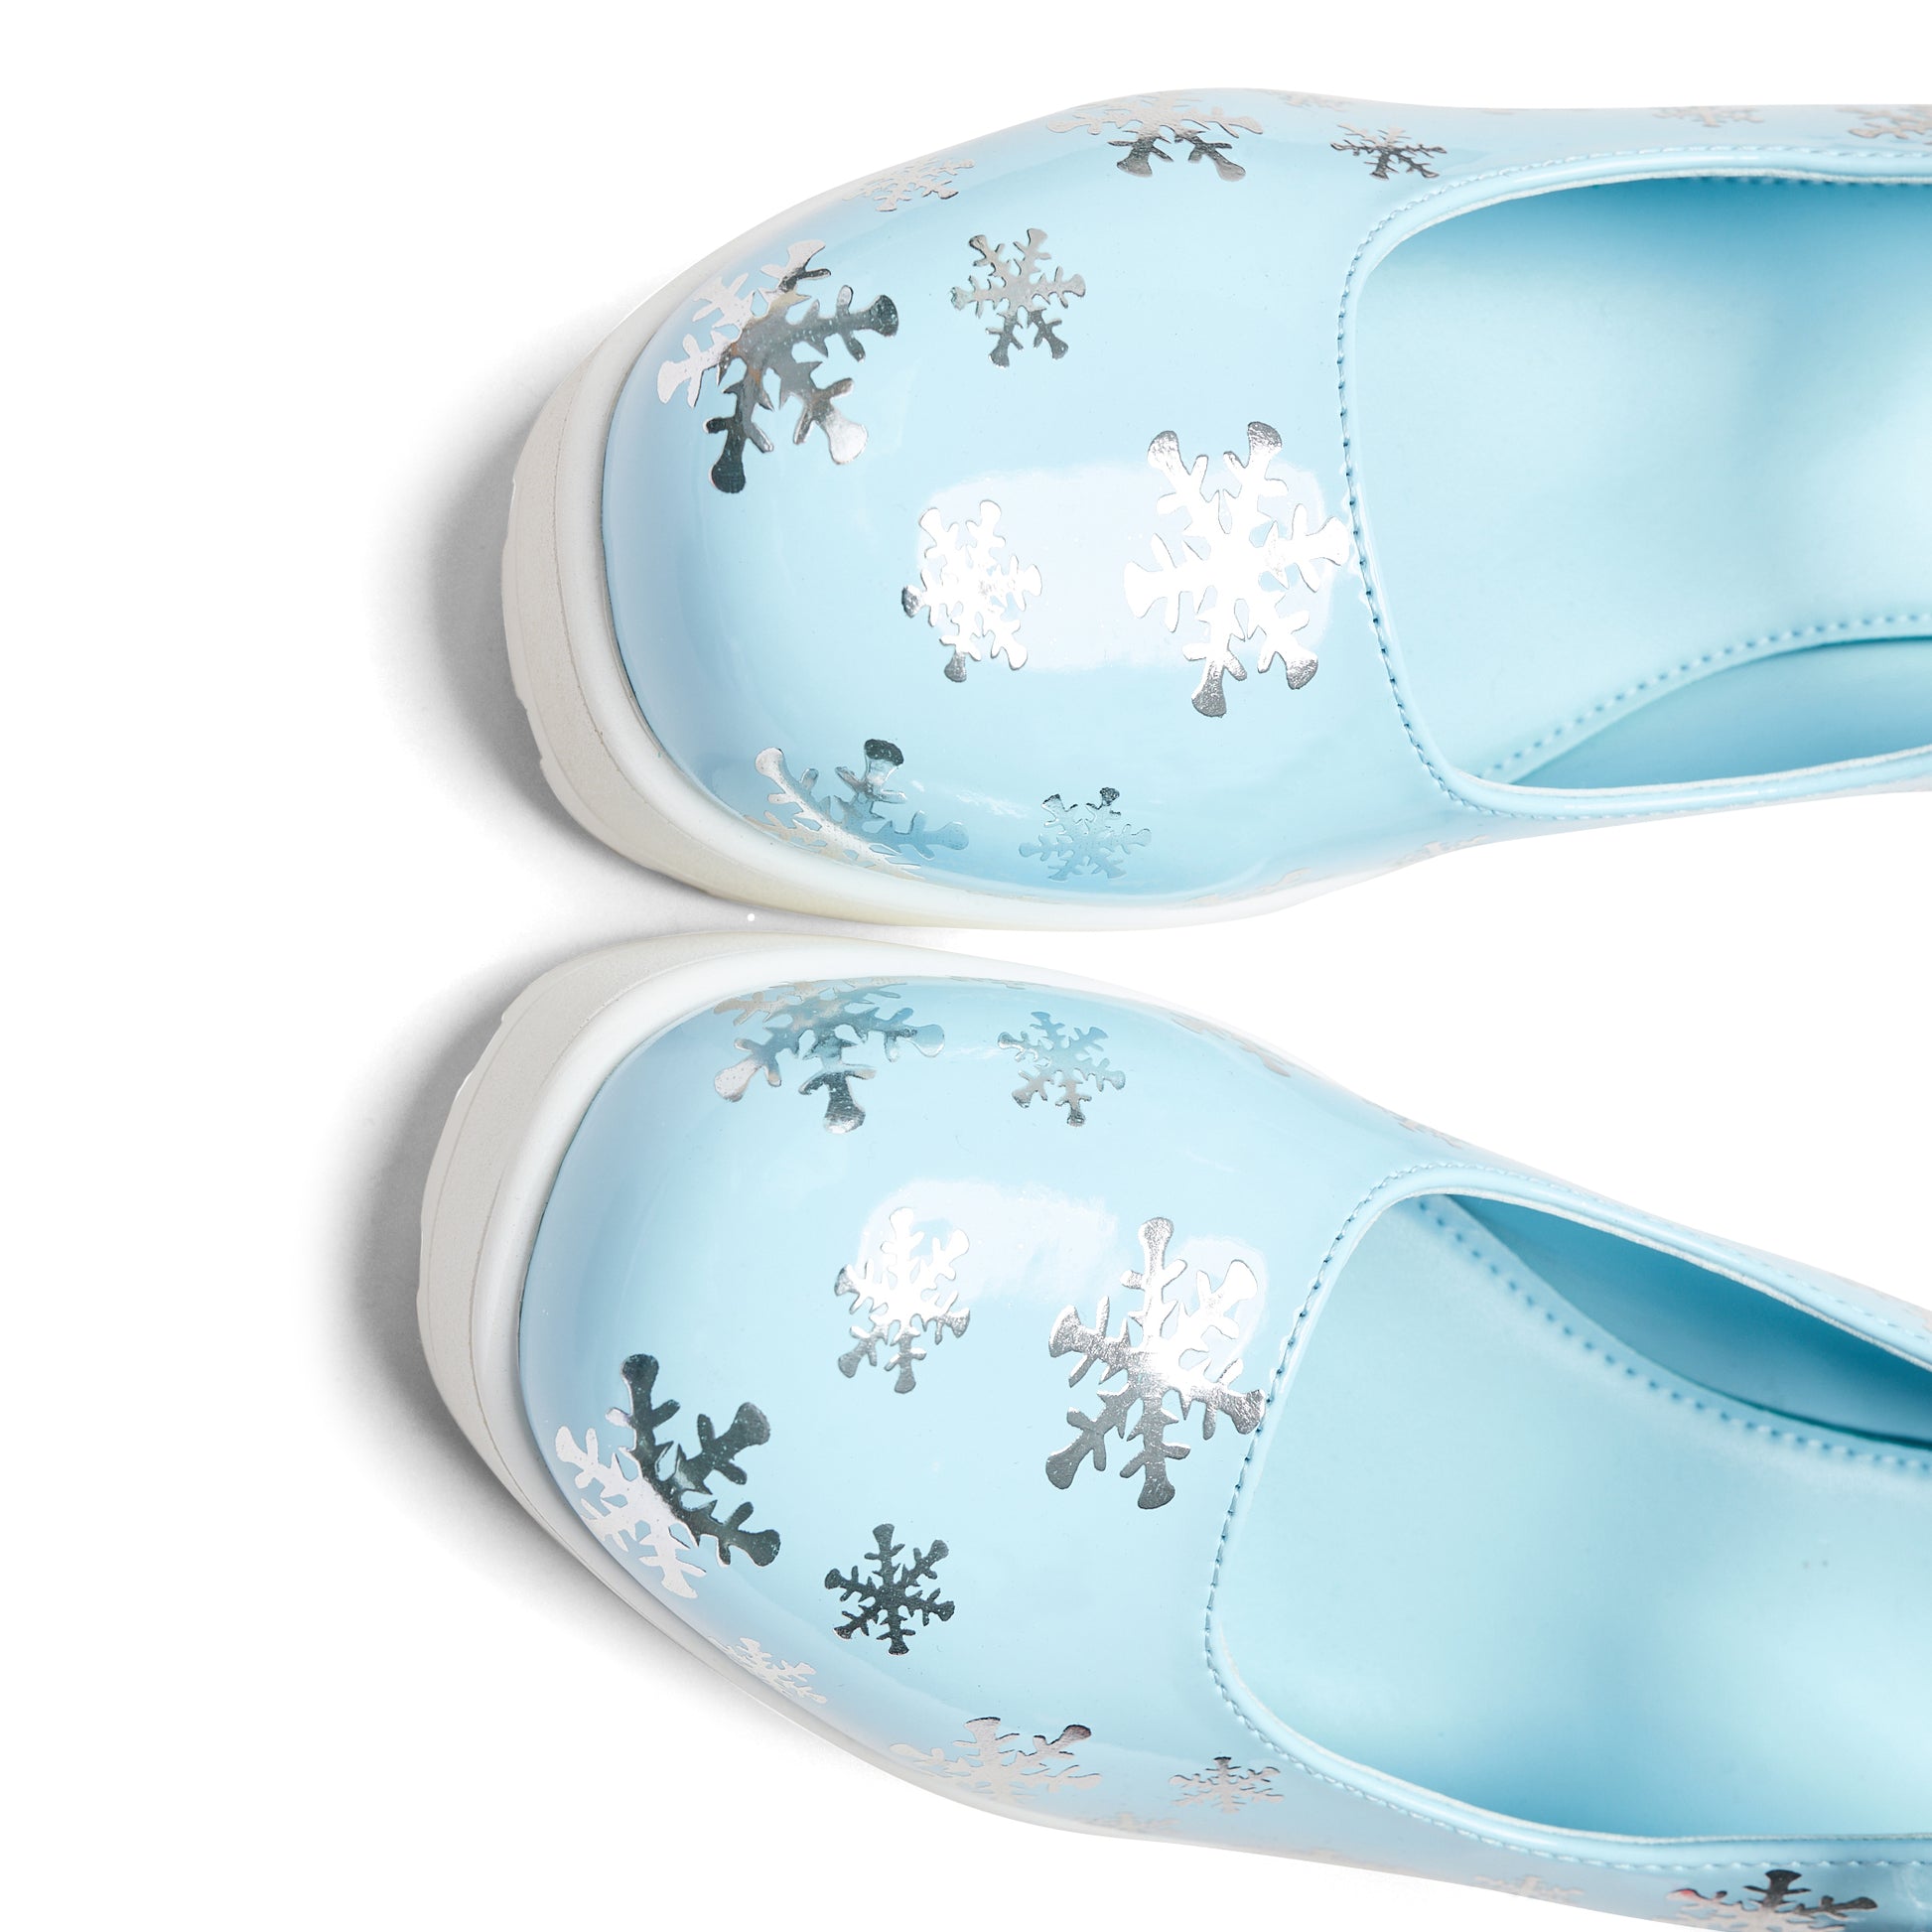 Tira Blue Mary Janes ' Frosty Kisses Edition' - Mary Janes - KOI Footwear - Blue - Top View